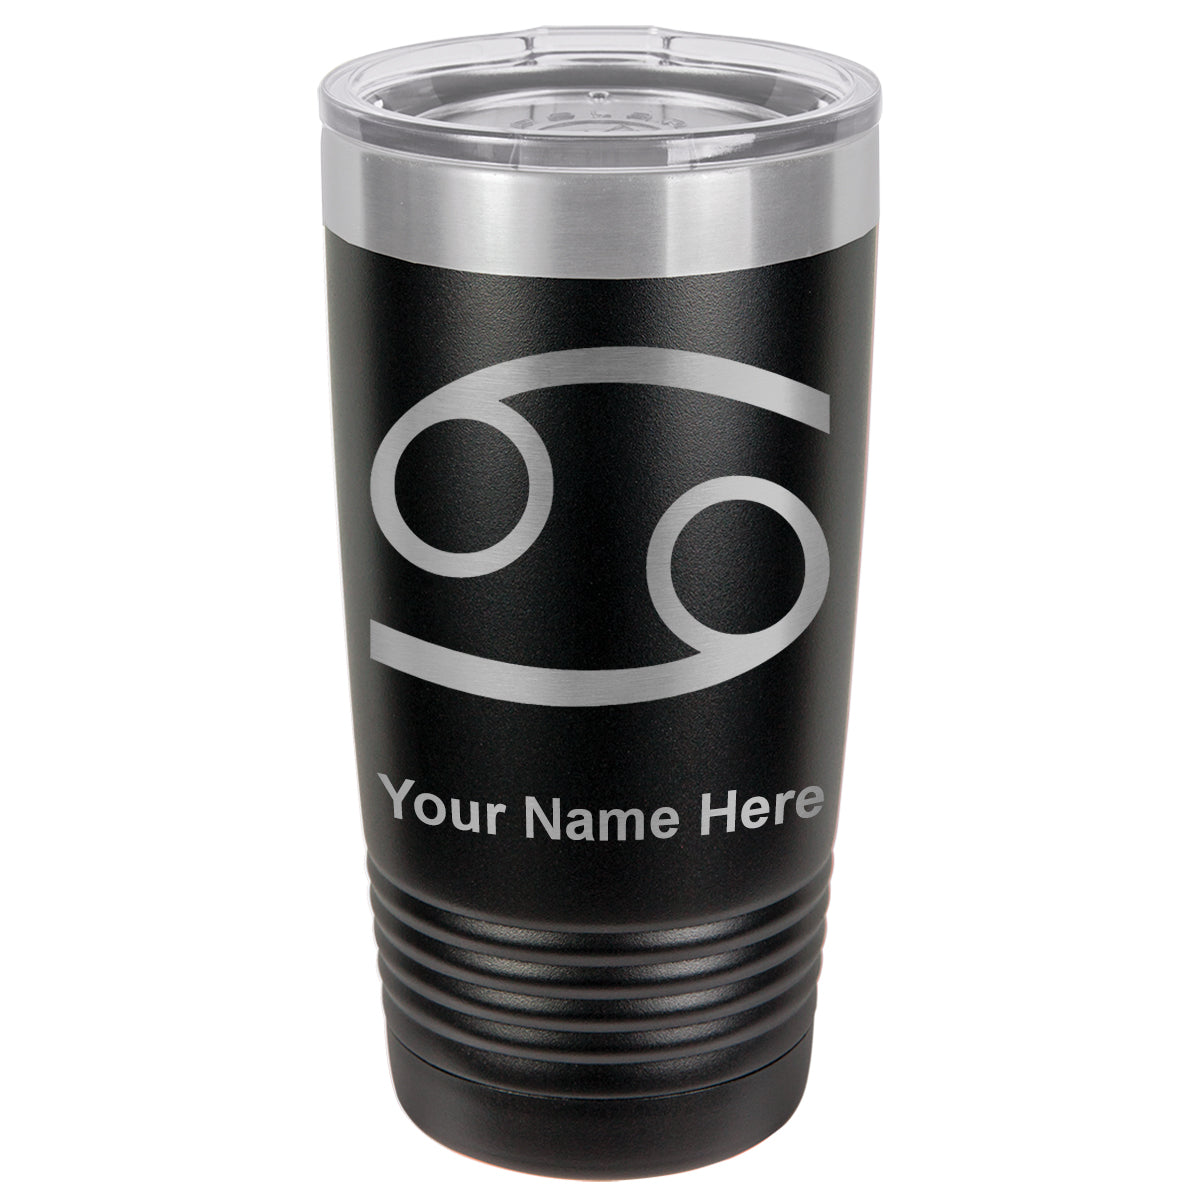 20oz Vacuum Insulated Tumbler Mug, Zodiac Sign Cancer, Personalized Engraving Included